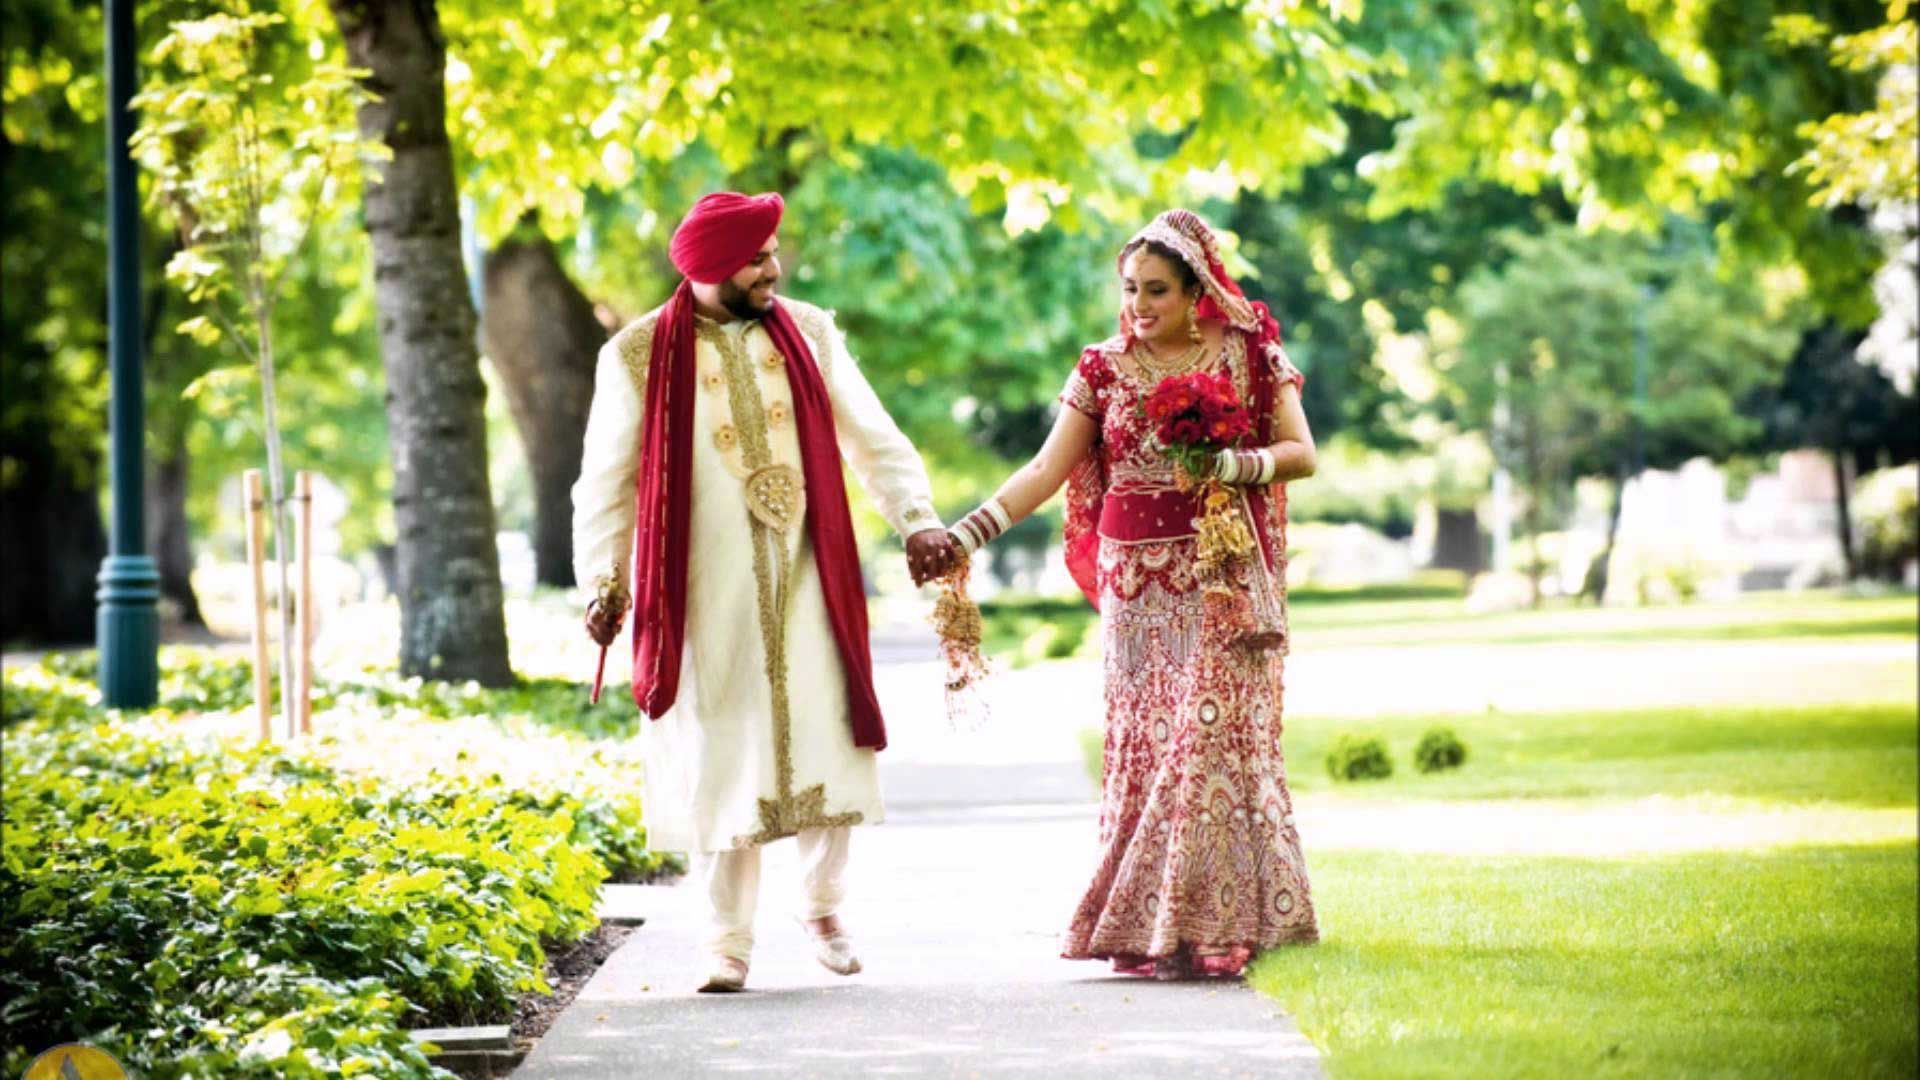 sweet cute punjabi wedding lover love couple picture HD download. Wedding image, Love couple wallpaper, Love couple photo